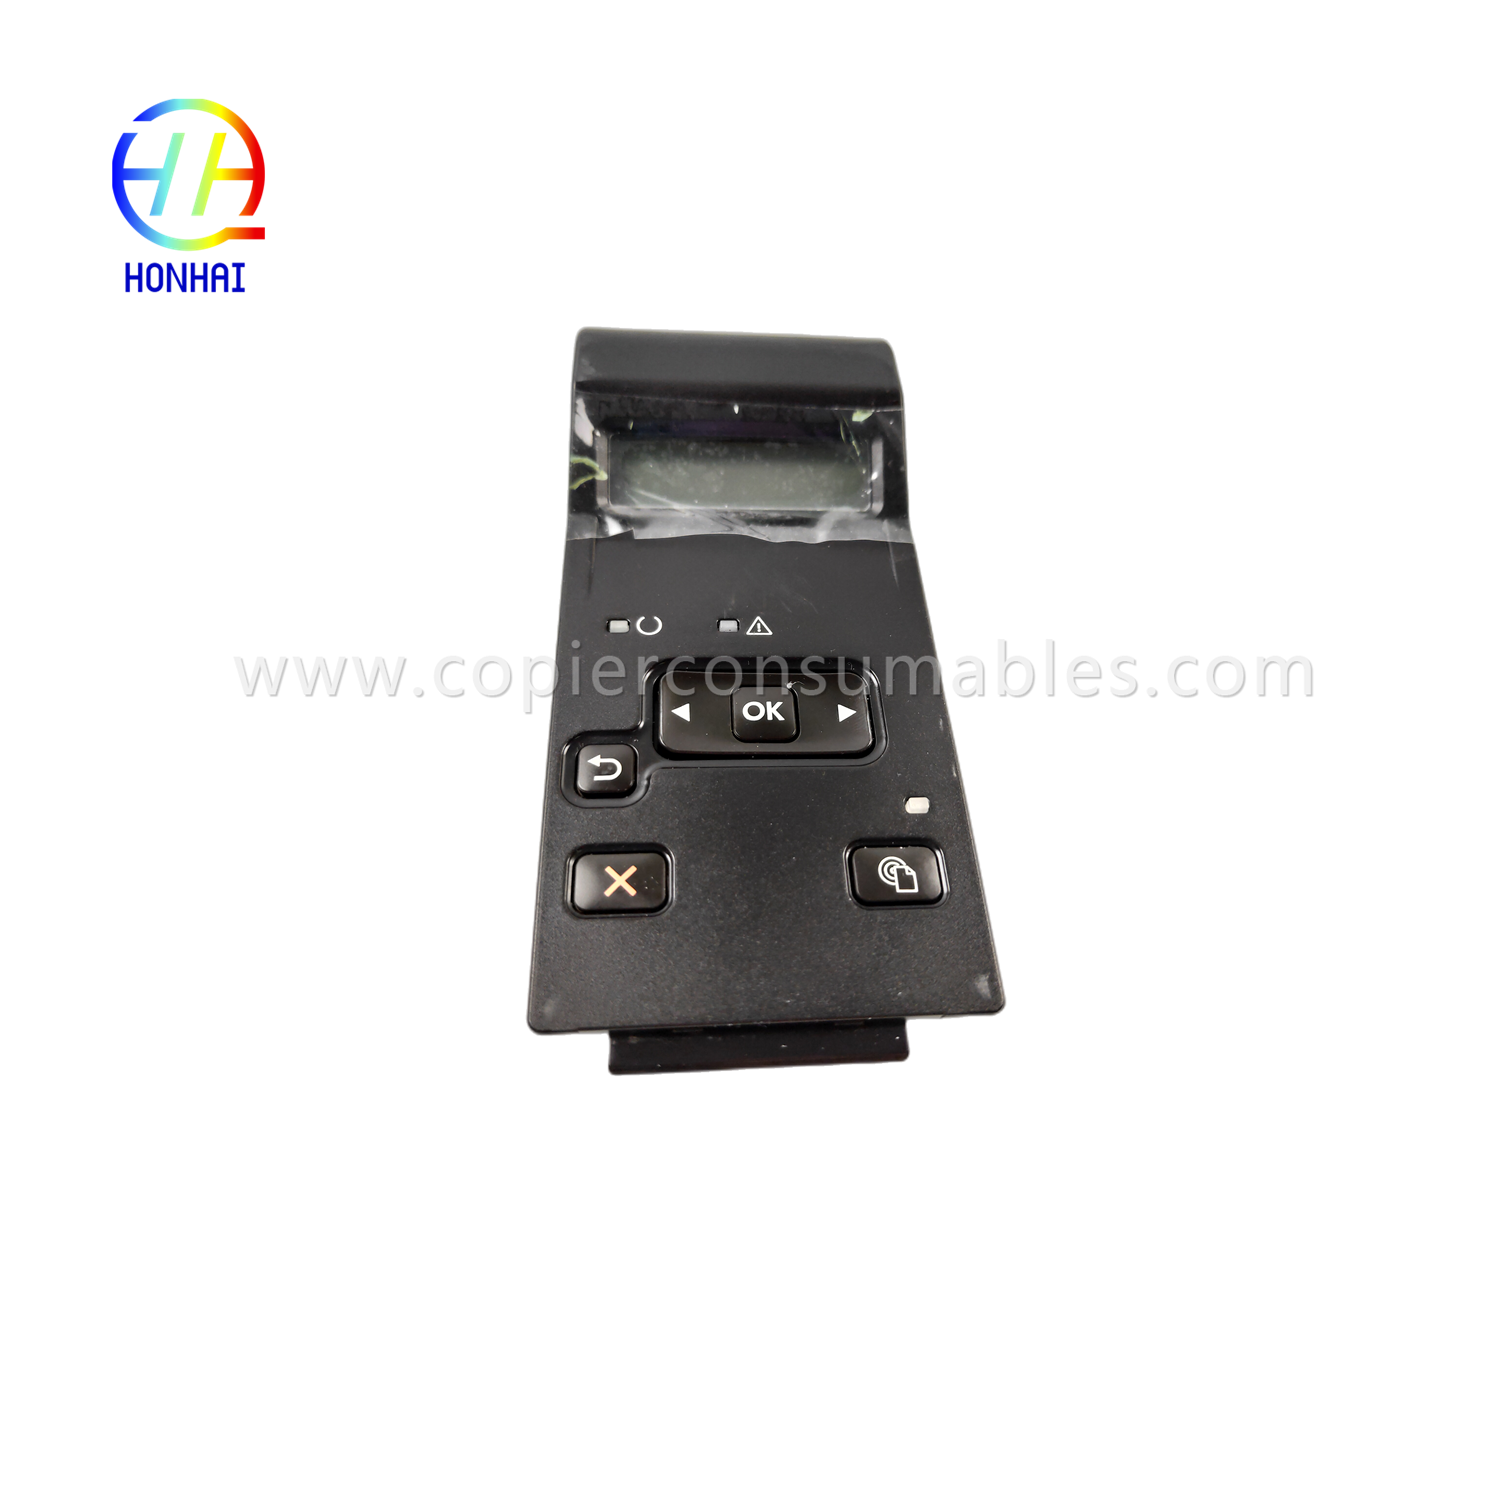 Control Panel Touch Screen for HP LaserJet 400 M401d M401dn M401n M401 m401 401d 401dn 401n